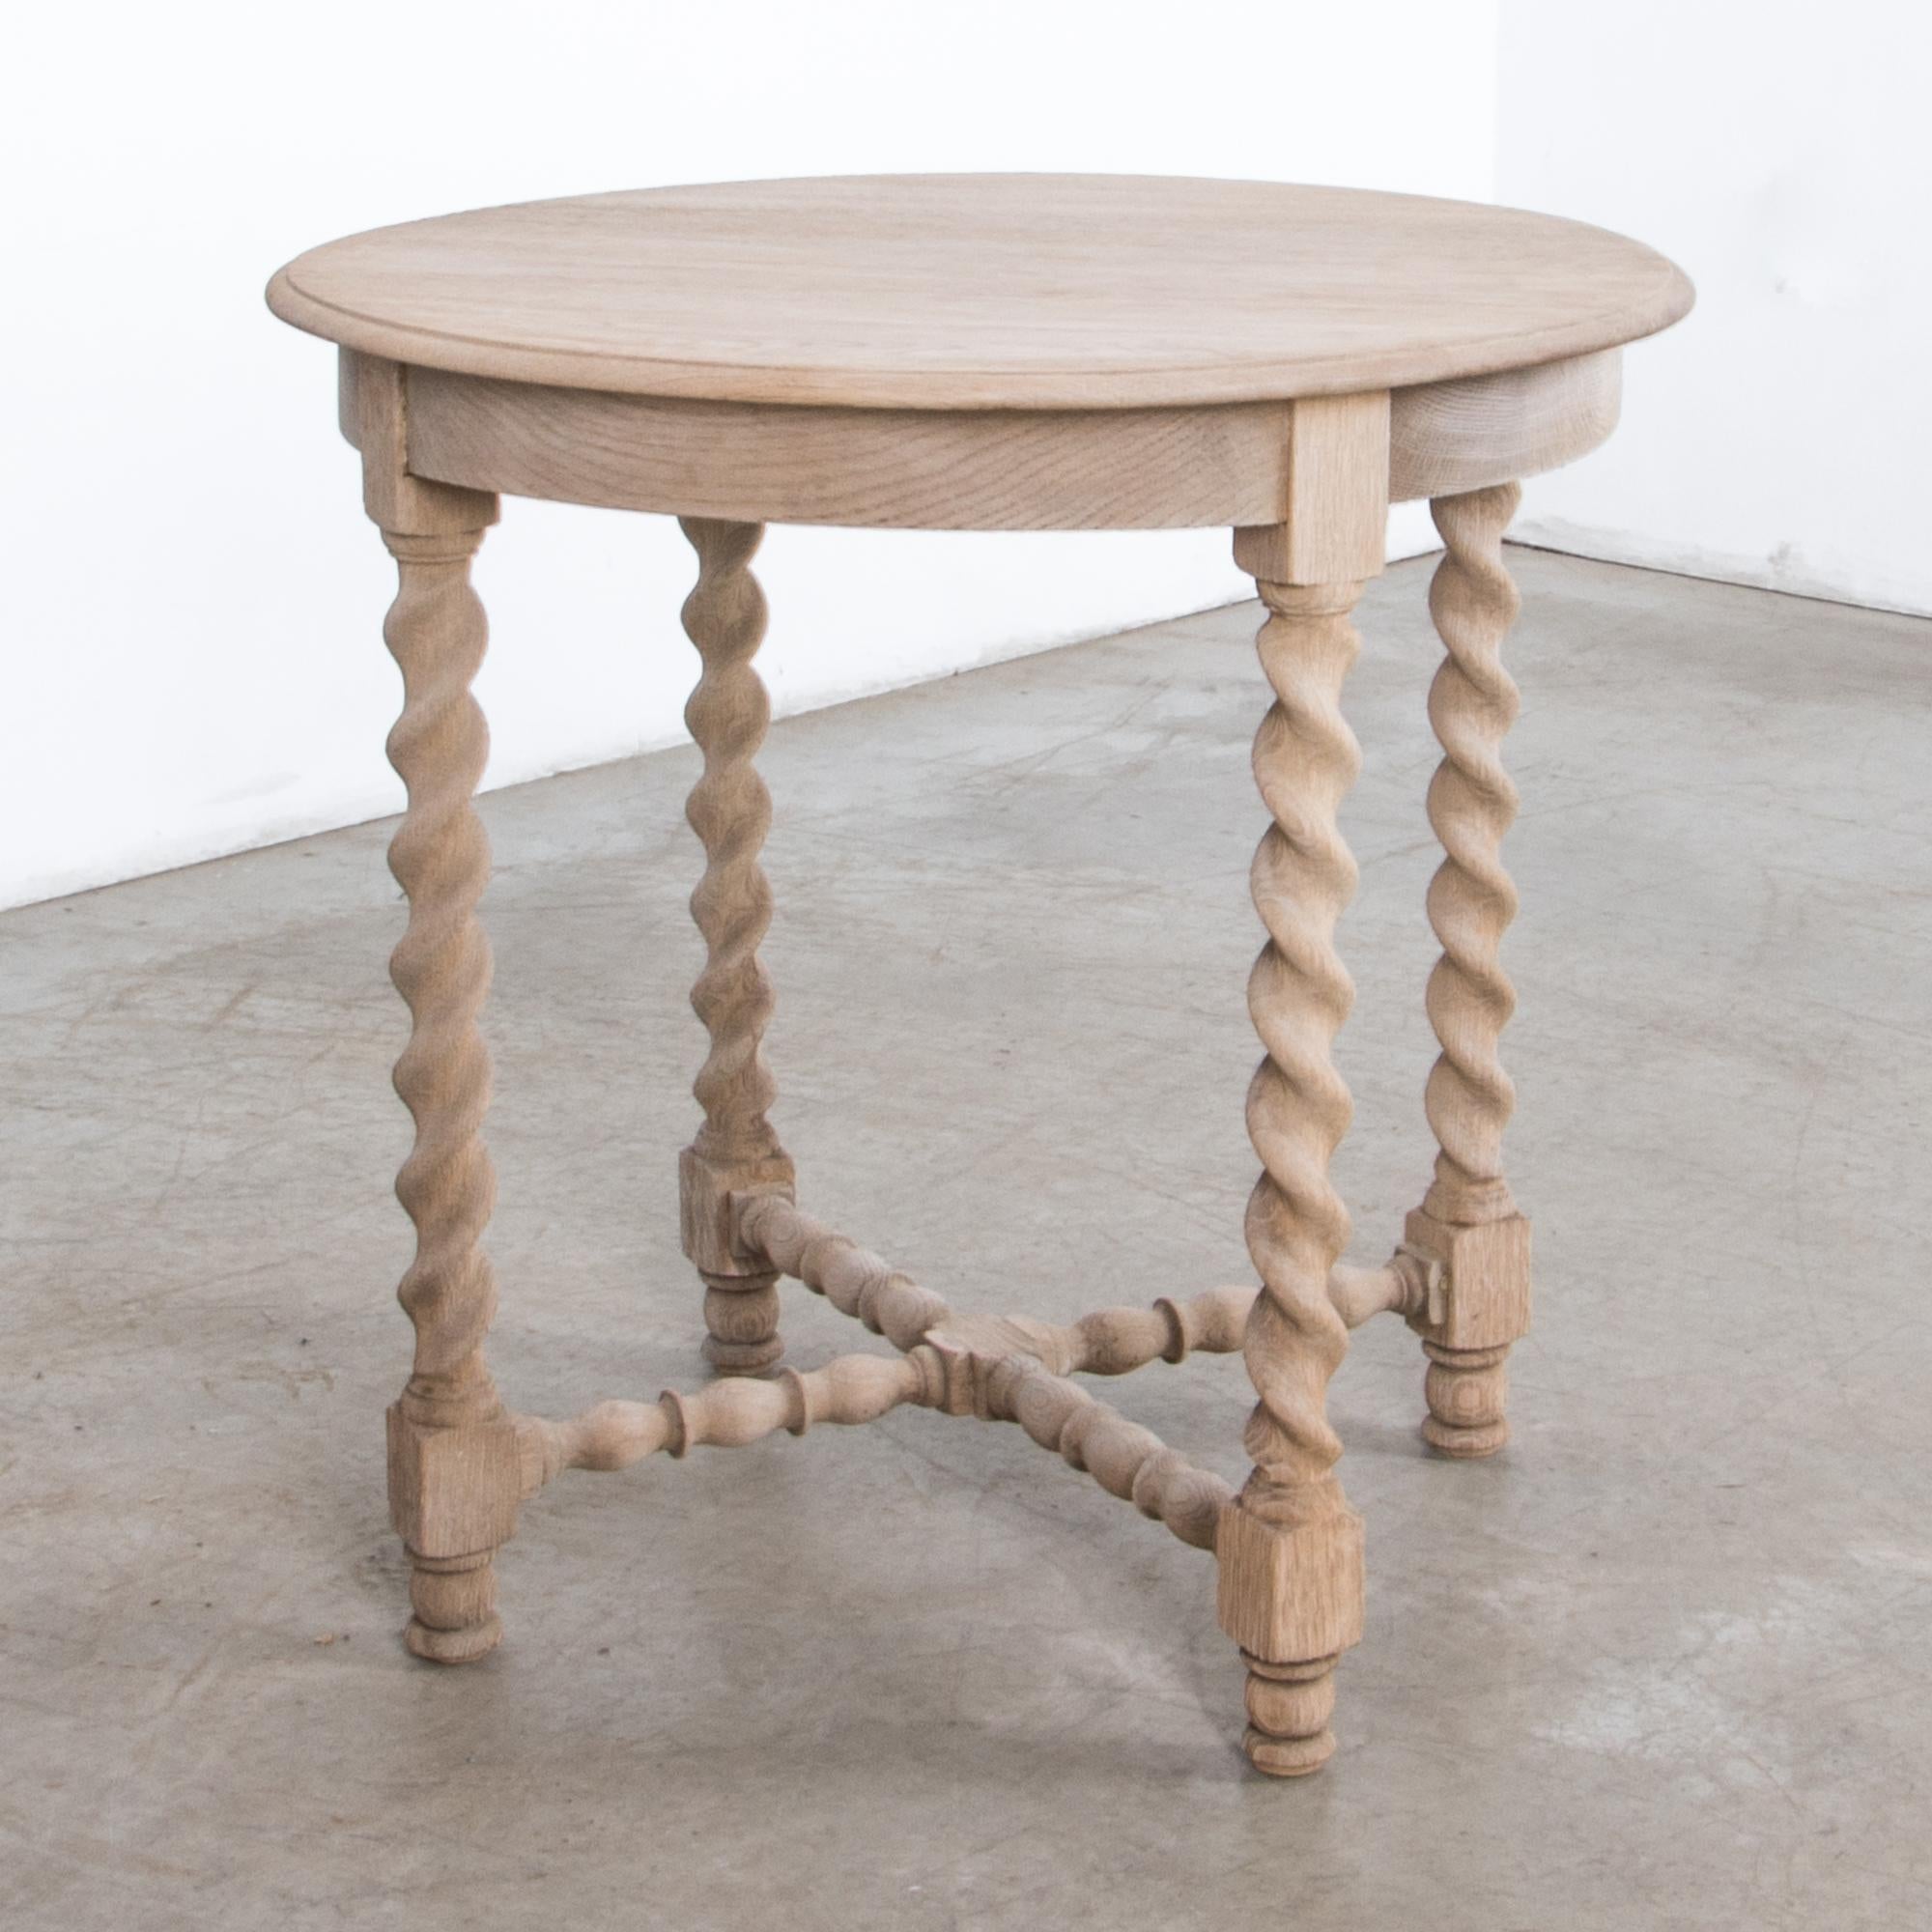 French Provincial Bleached Oak Columned Round Table